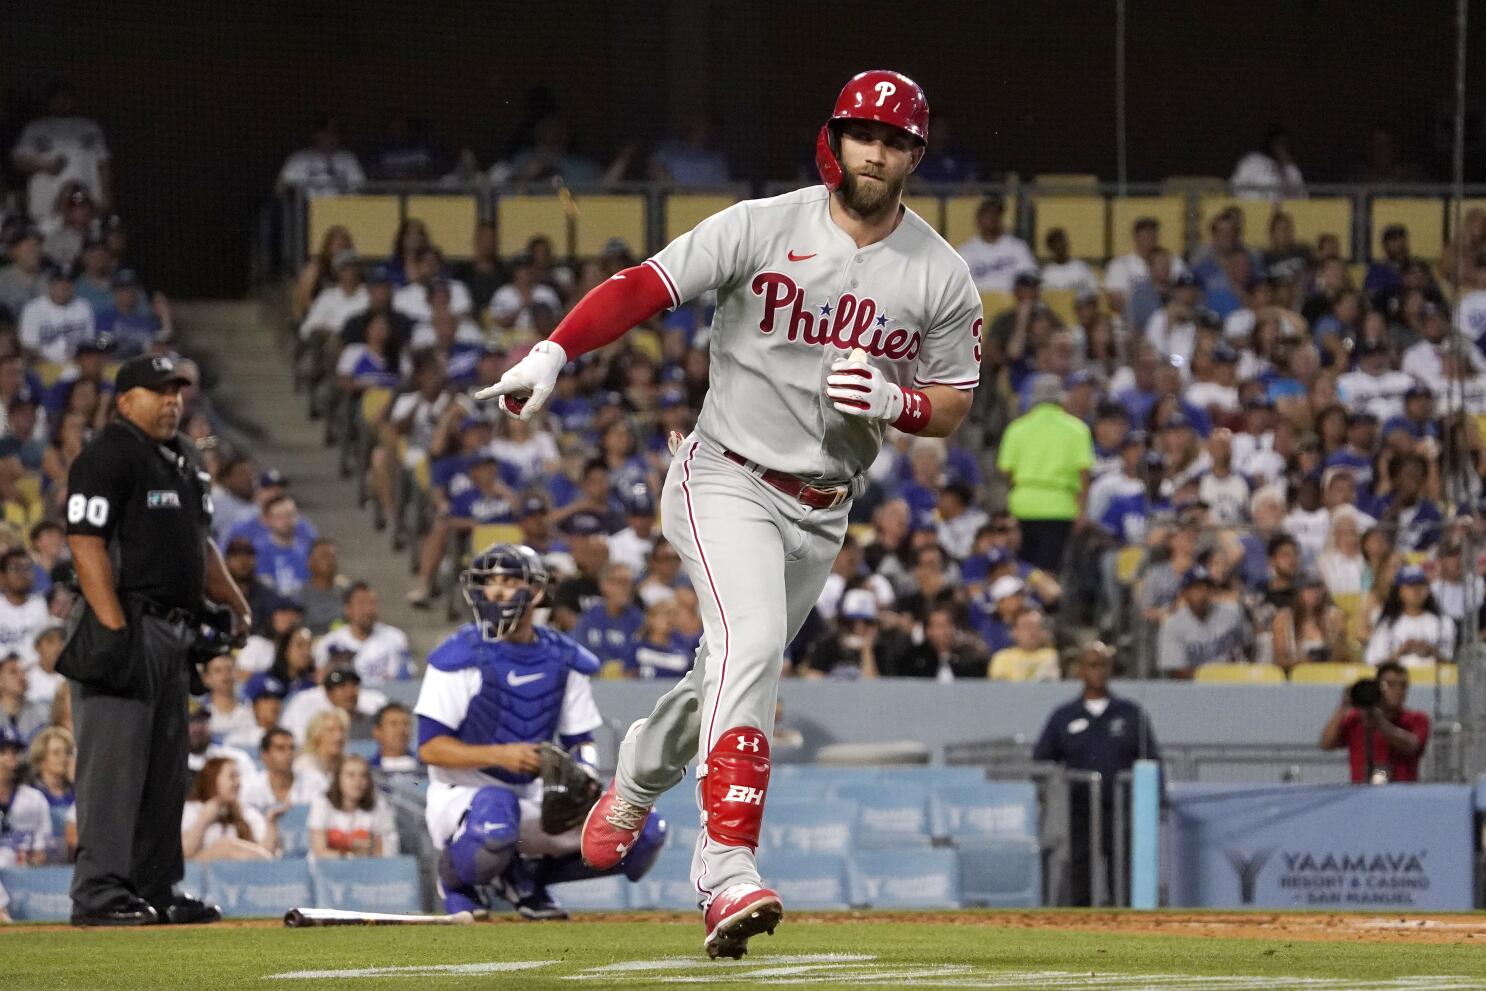 In Home Run Derby win, Bryce Harper forgets struggles to captivate